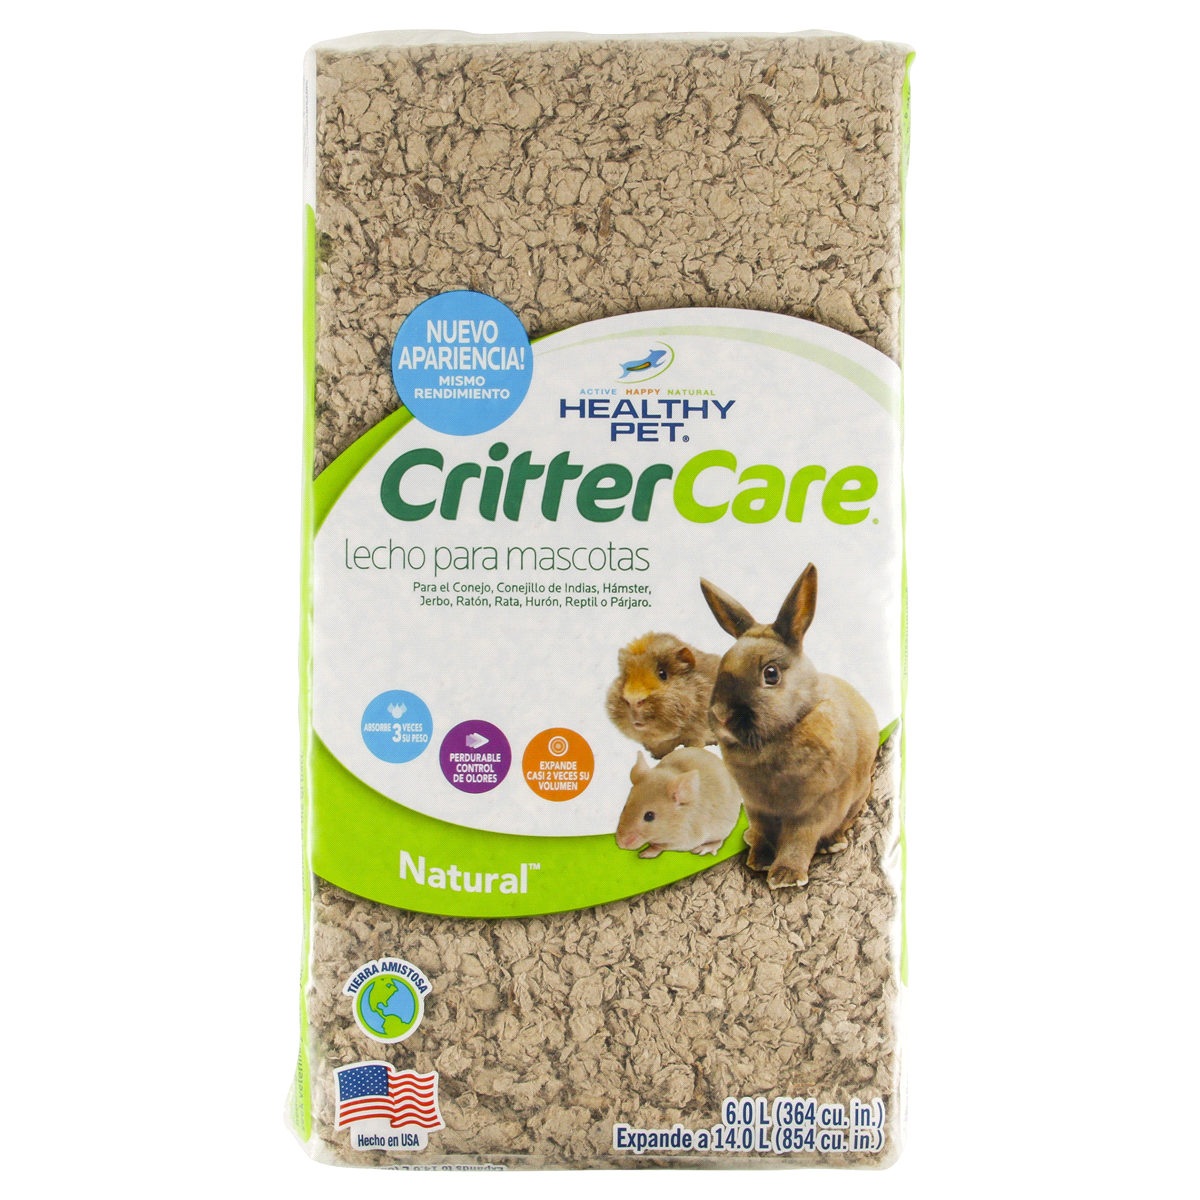 slide 3 of 5, Healthy Pet Crittercare Light Brown Natural Bedding For Small Animals, 14 liter